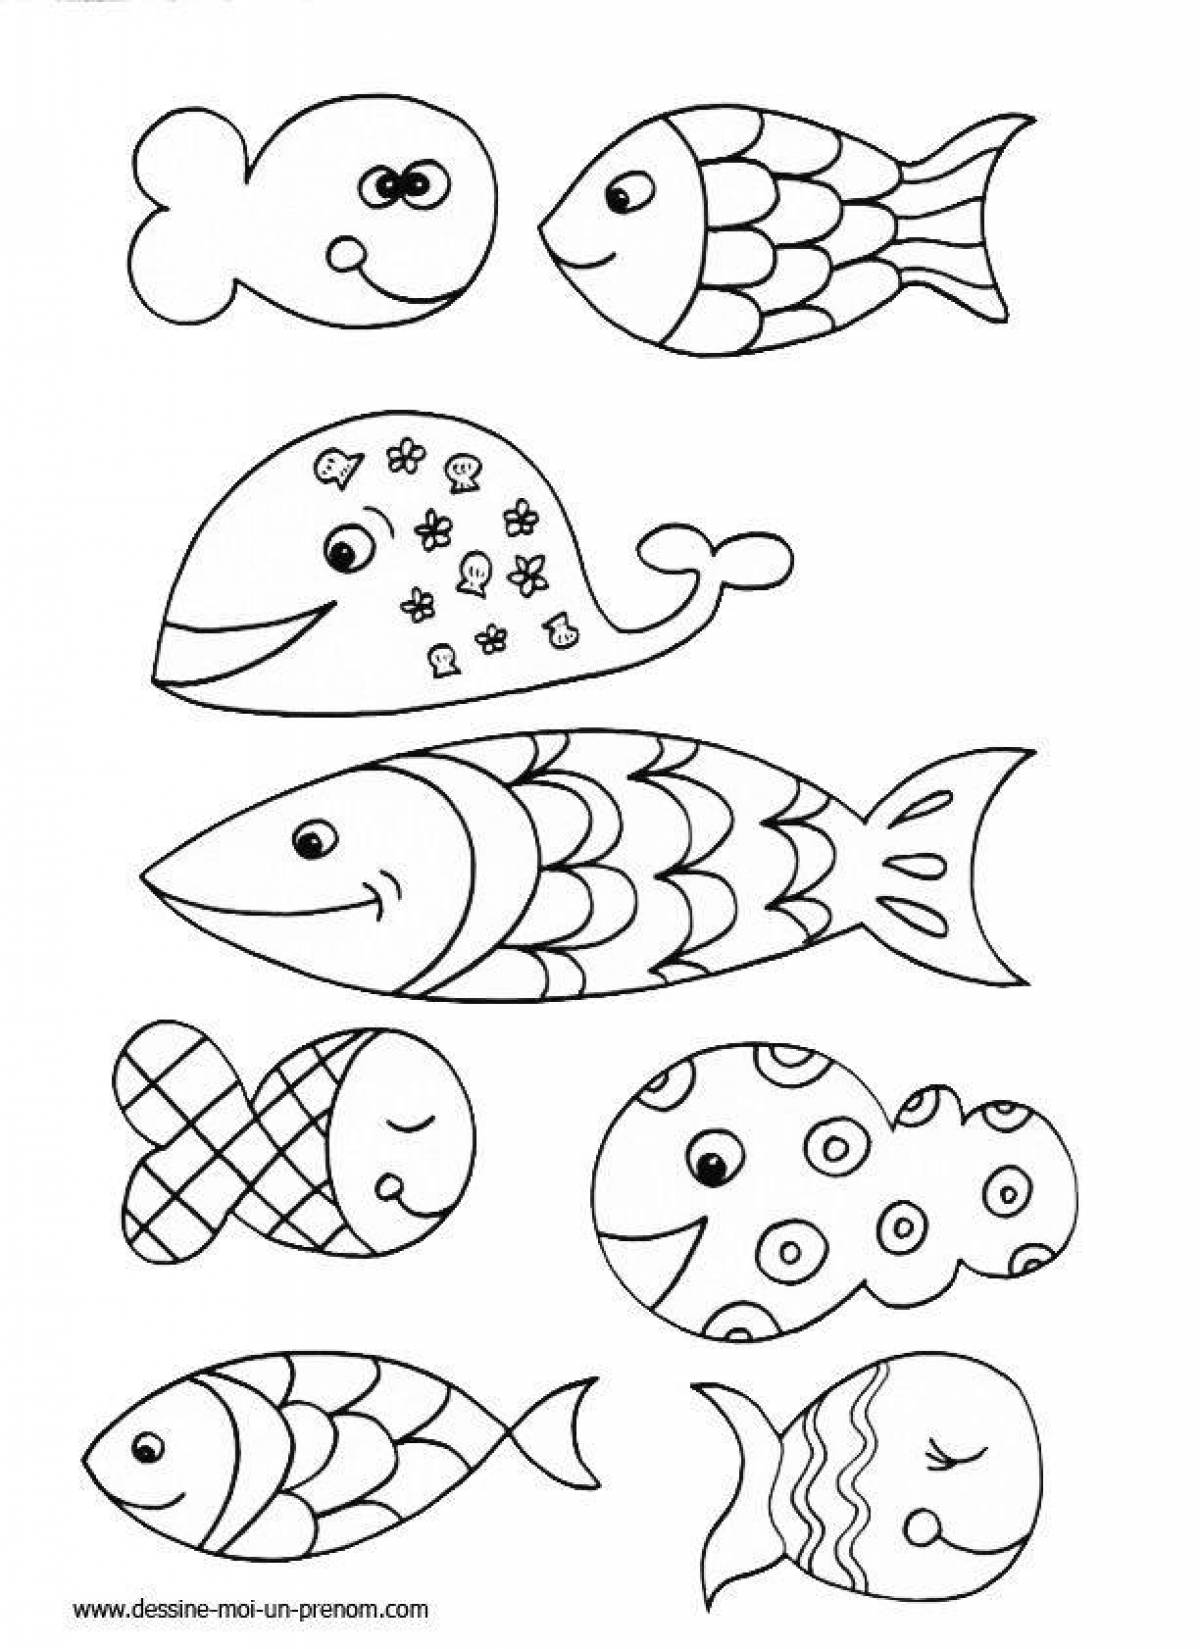 Fancy fish coloring book for 4-5 year olds